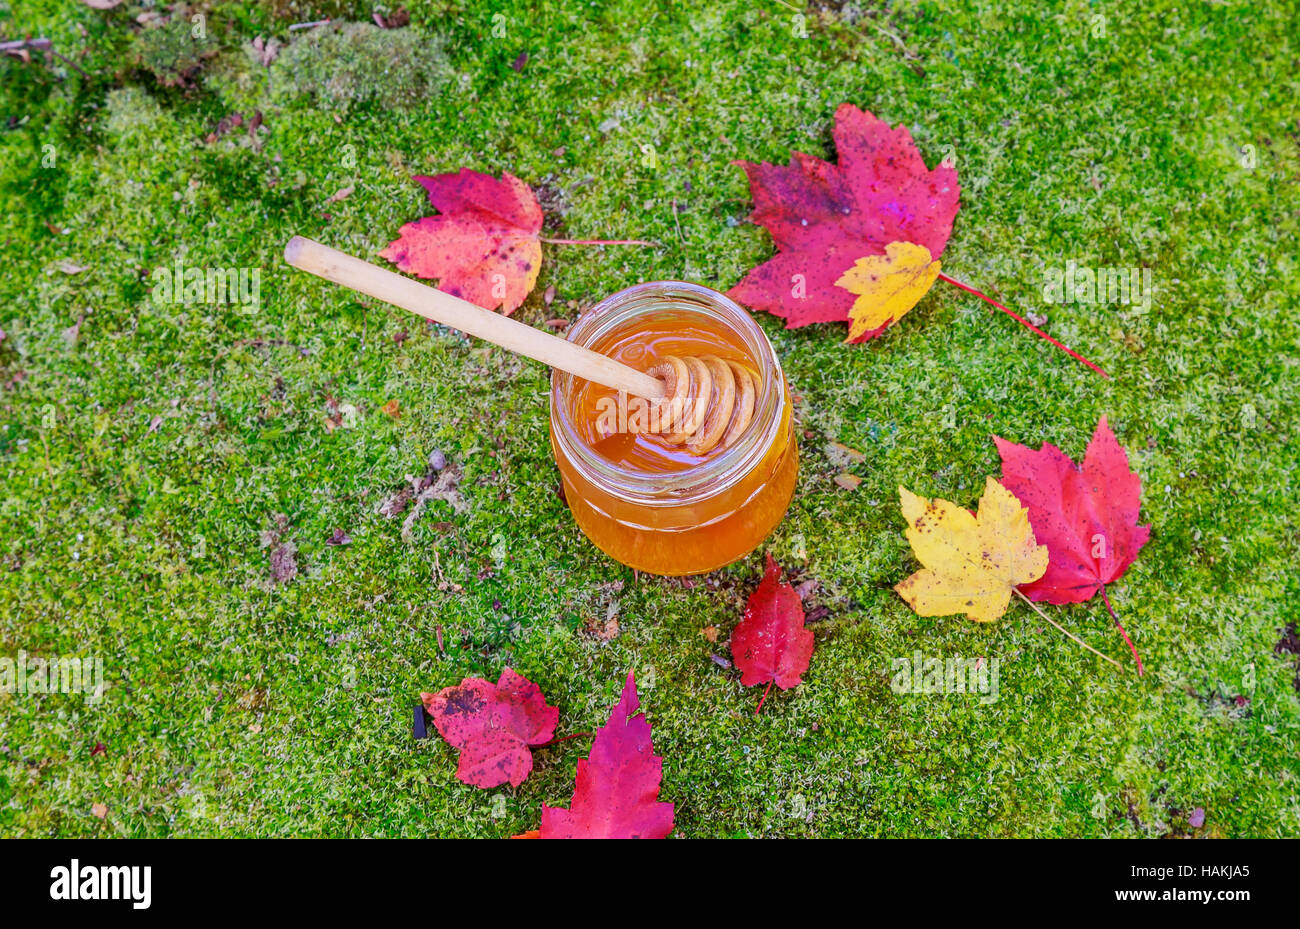 Honey in a glass jar with flowers melliferous herbs on wooden surface. Stock Photo